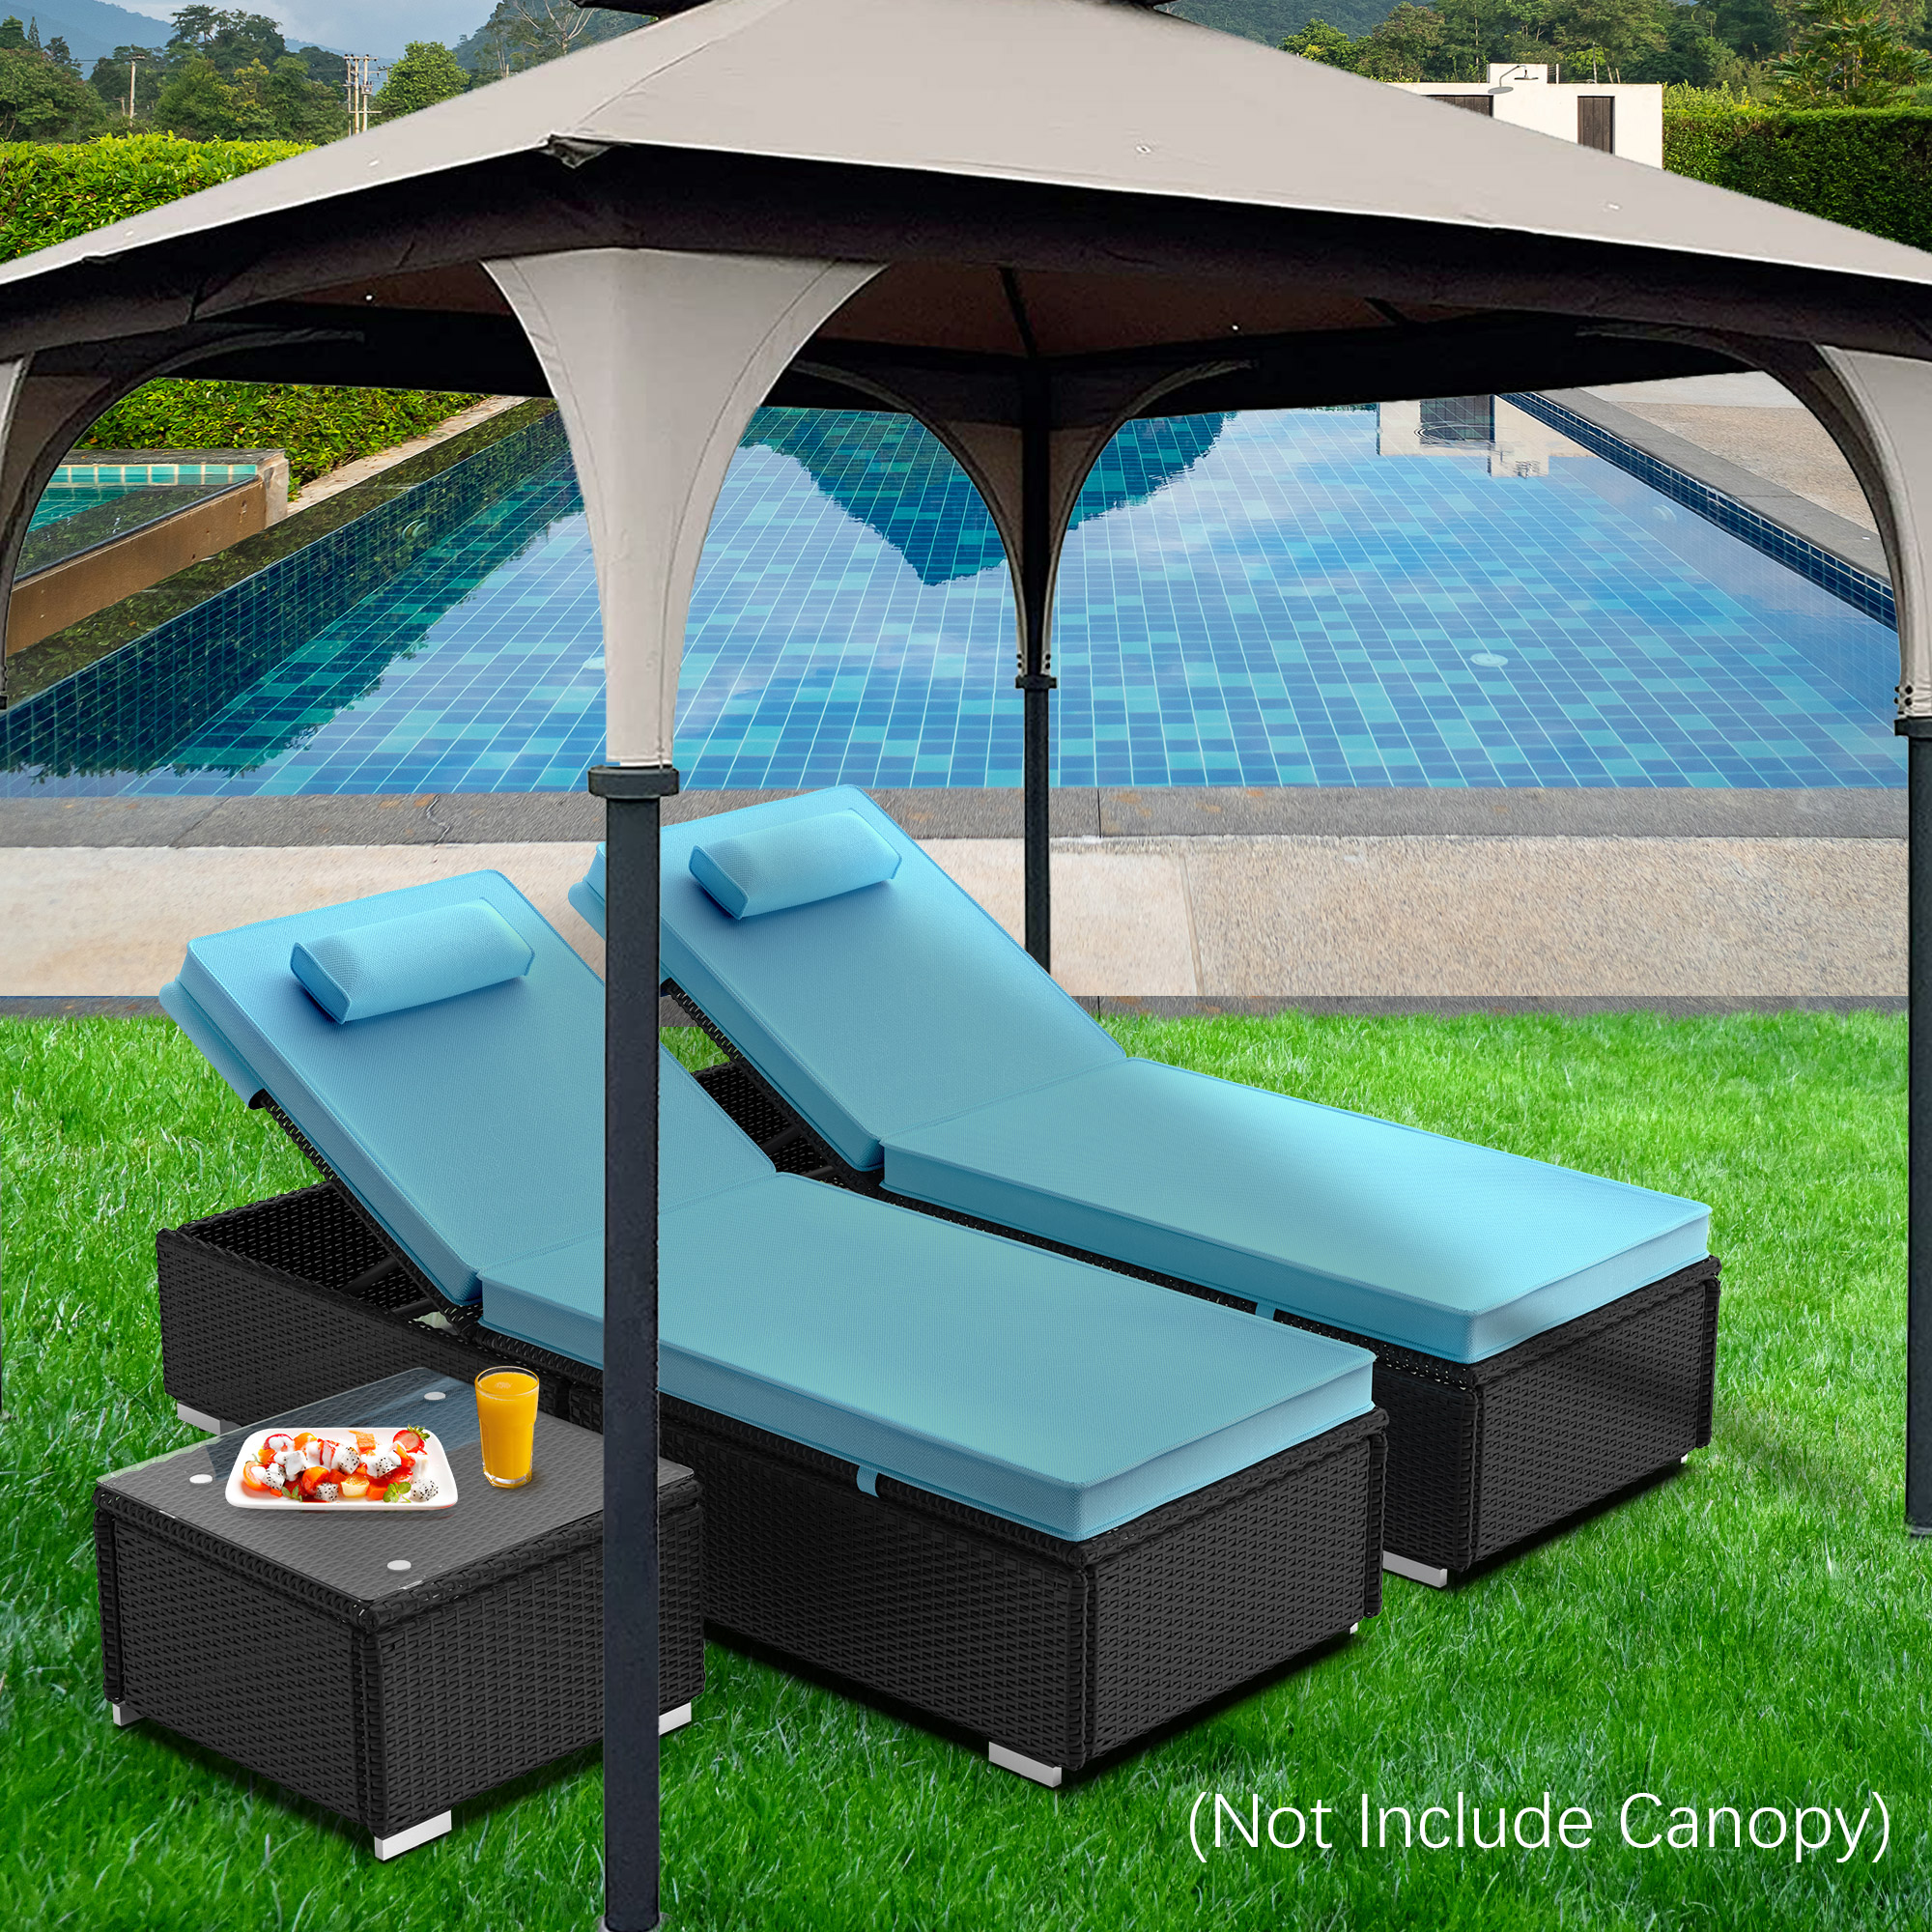 Segmart 3 Pieces Reclining Outdoor Patio Lounge Furniture Set, All-Weather Poolside Rattan Wicker Chaise Chairs Sets with Cushions & 2 Pillows, for Backyard Deck Porch Garden, SS2116 - image 4 of 13